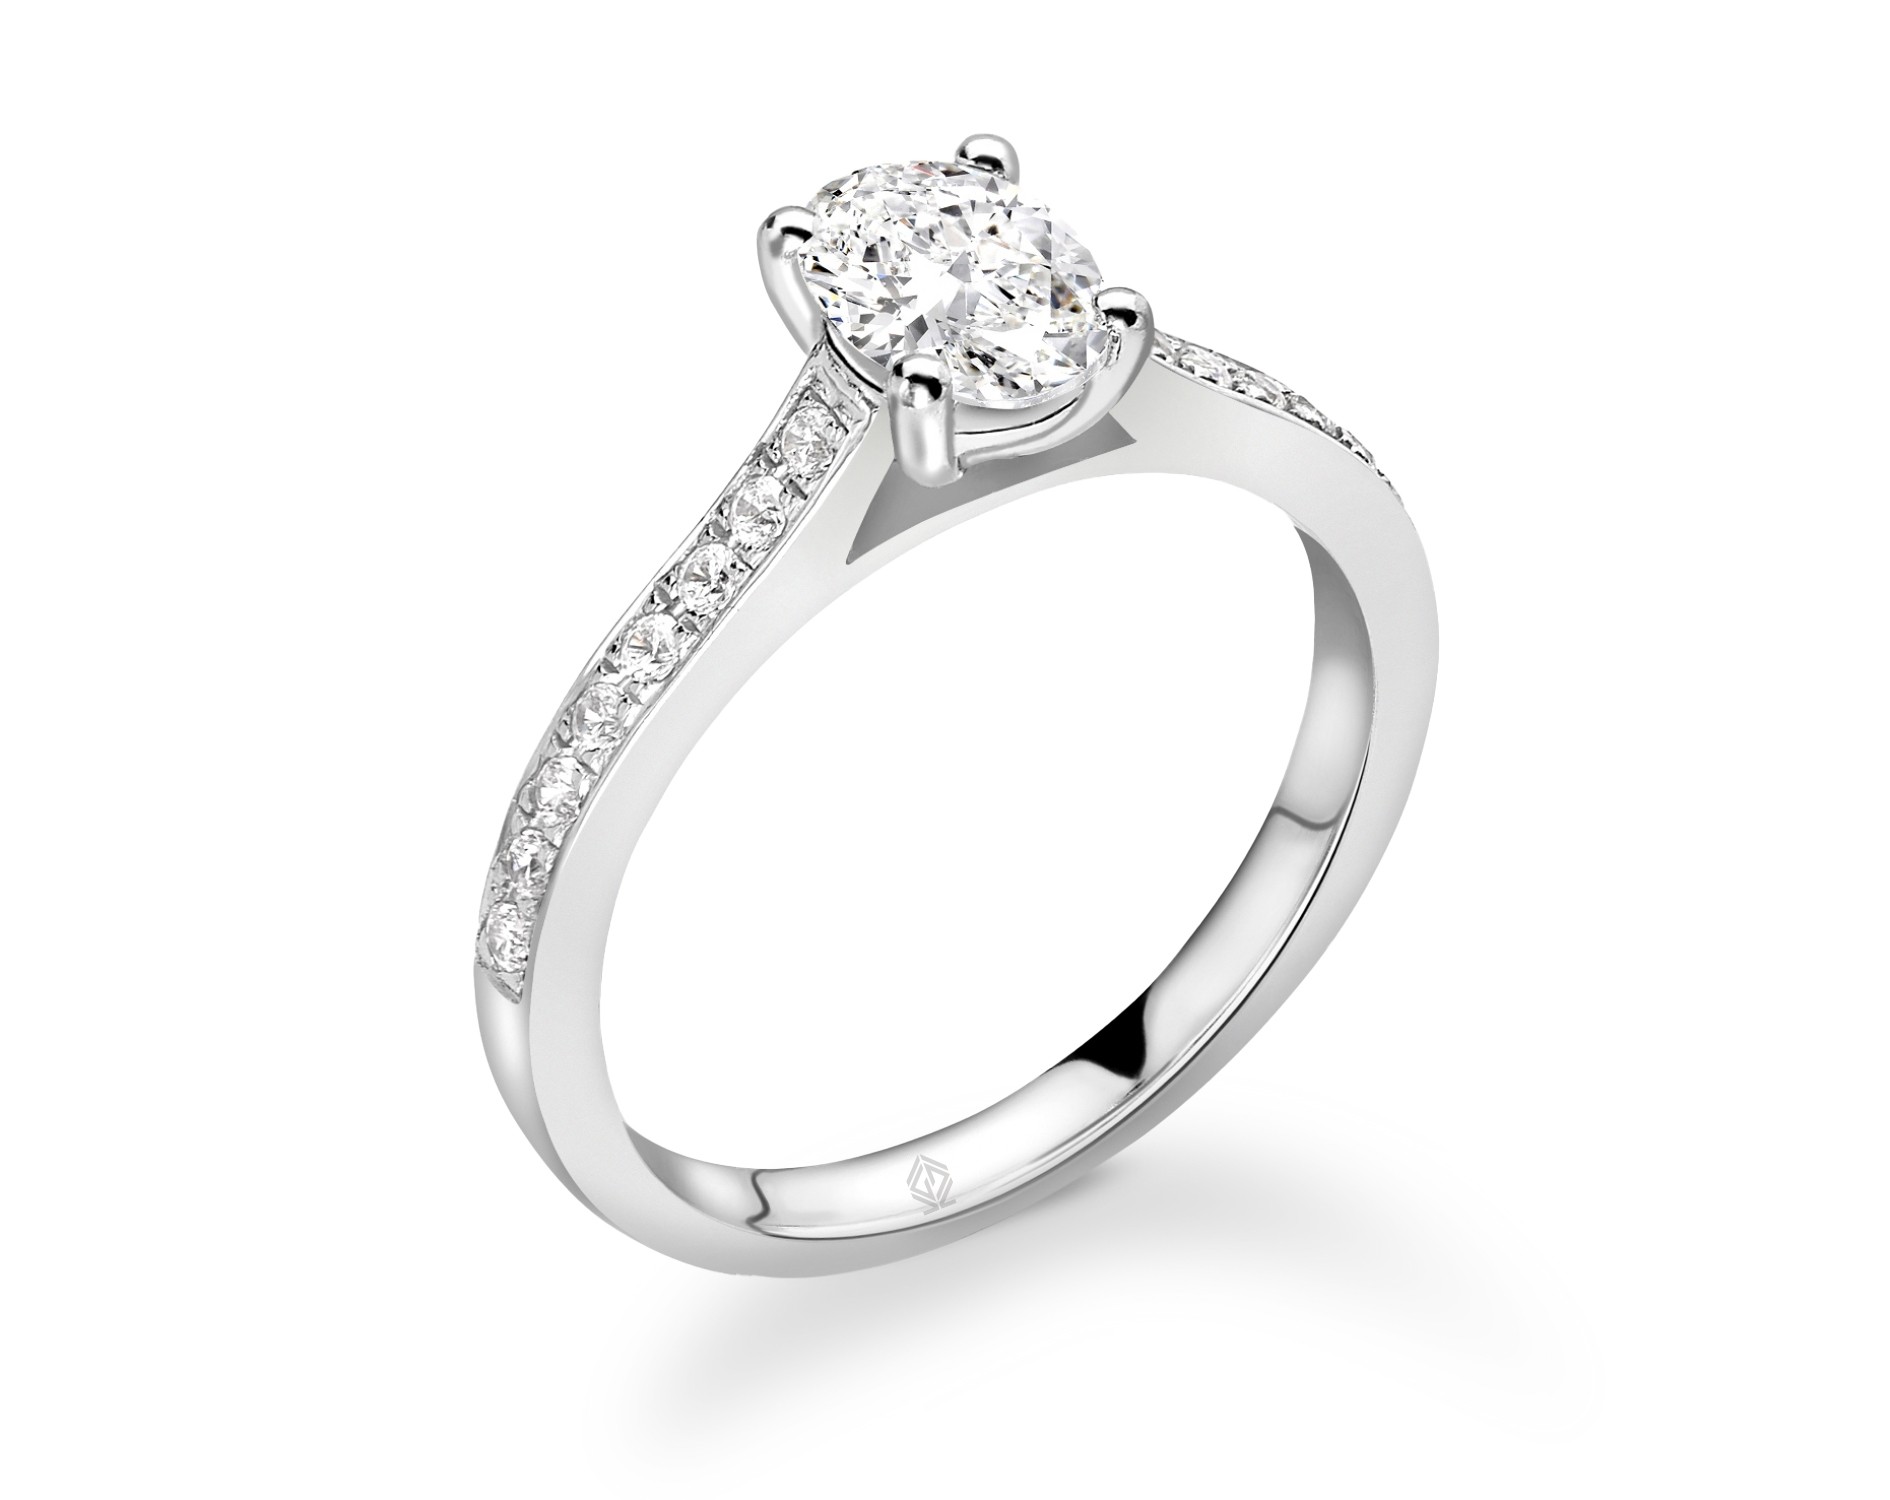 18K WHITE GOLD OVAL CUT 4 PRONGS DIAMOND ENGAGEMENT RING WITH SIDE STONES CHANNEL SET